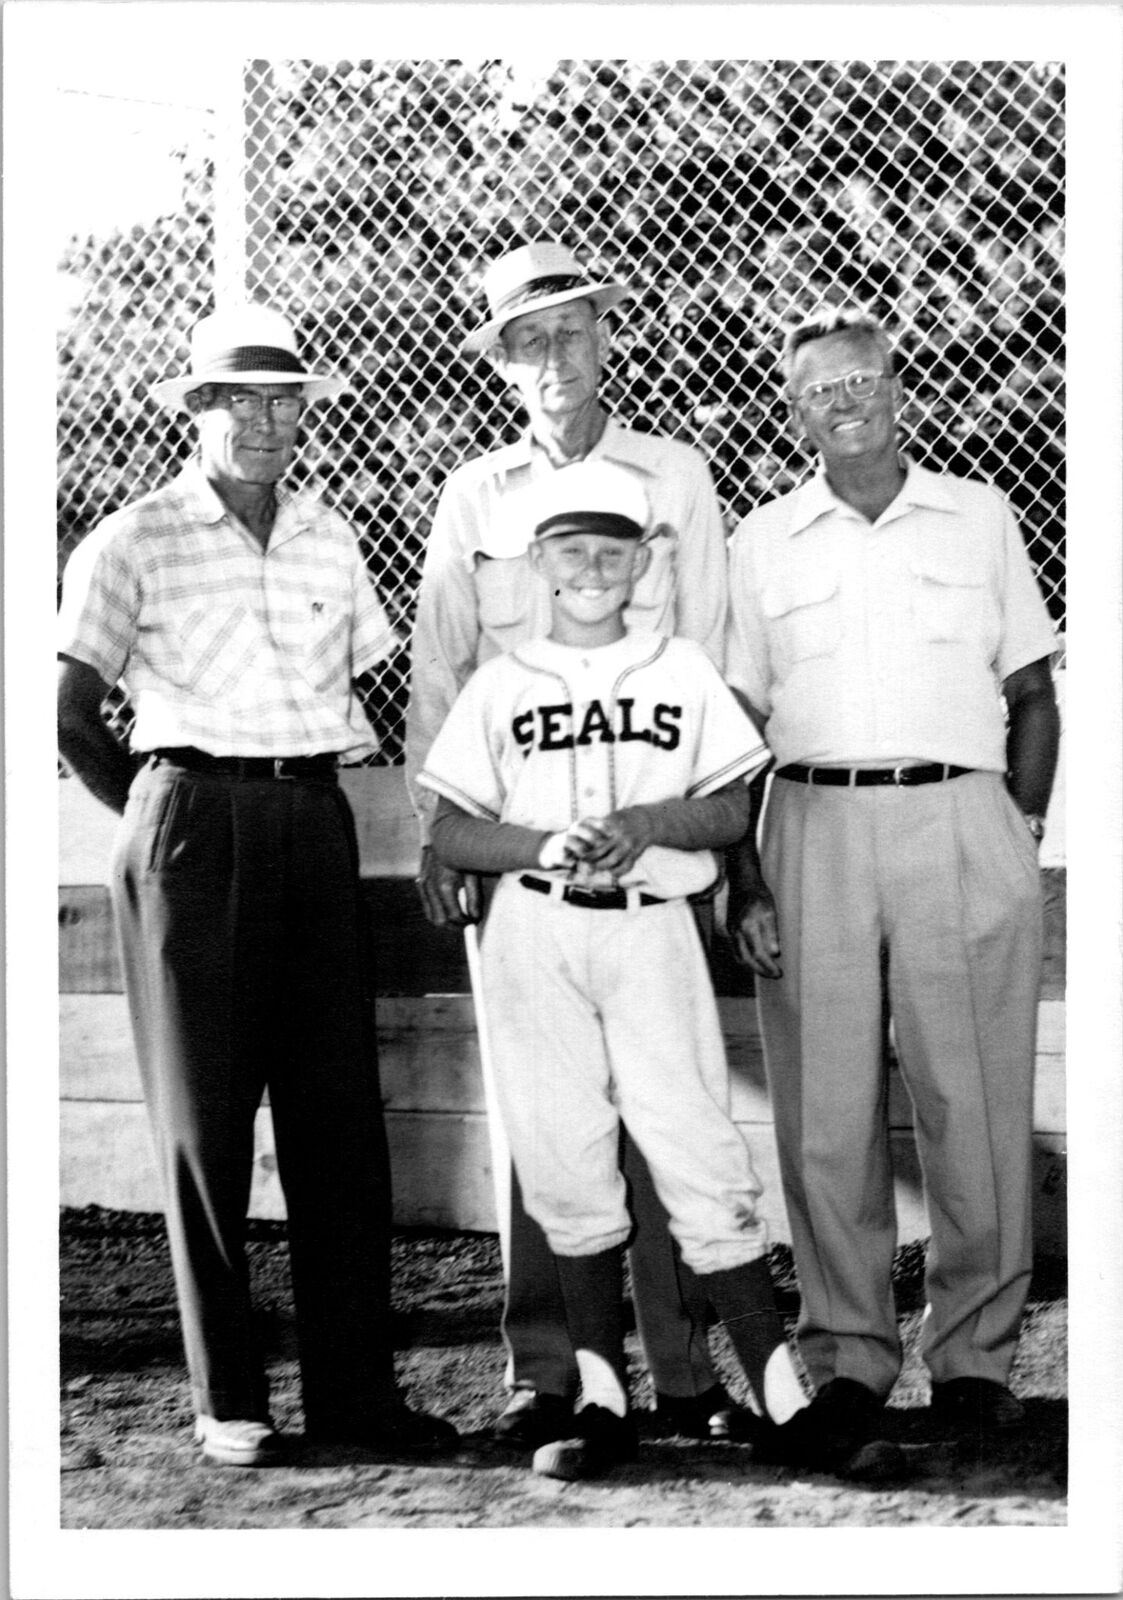  Seals little league player and 3 men taking photo Found Photo V0726